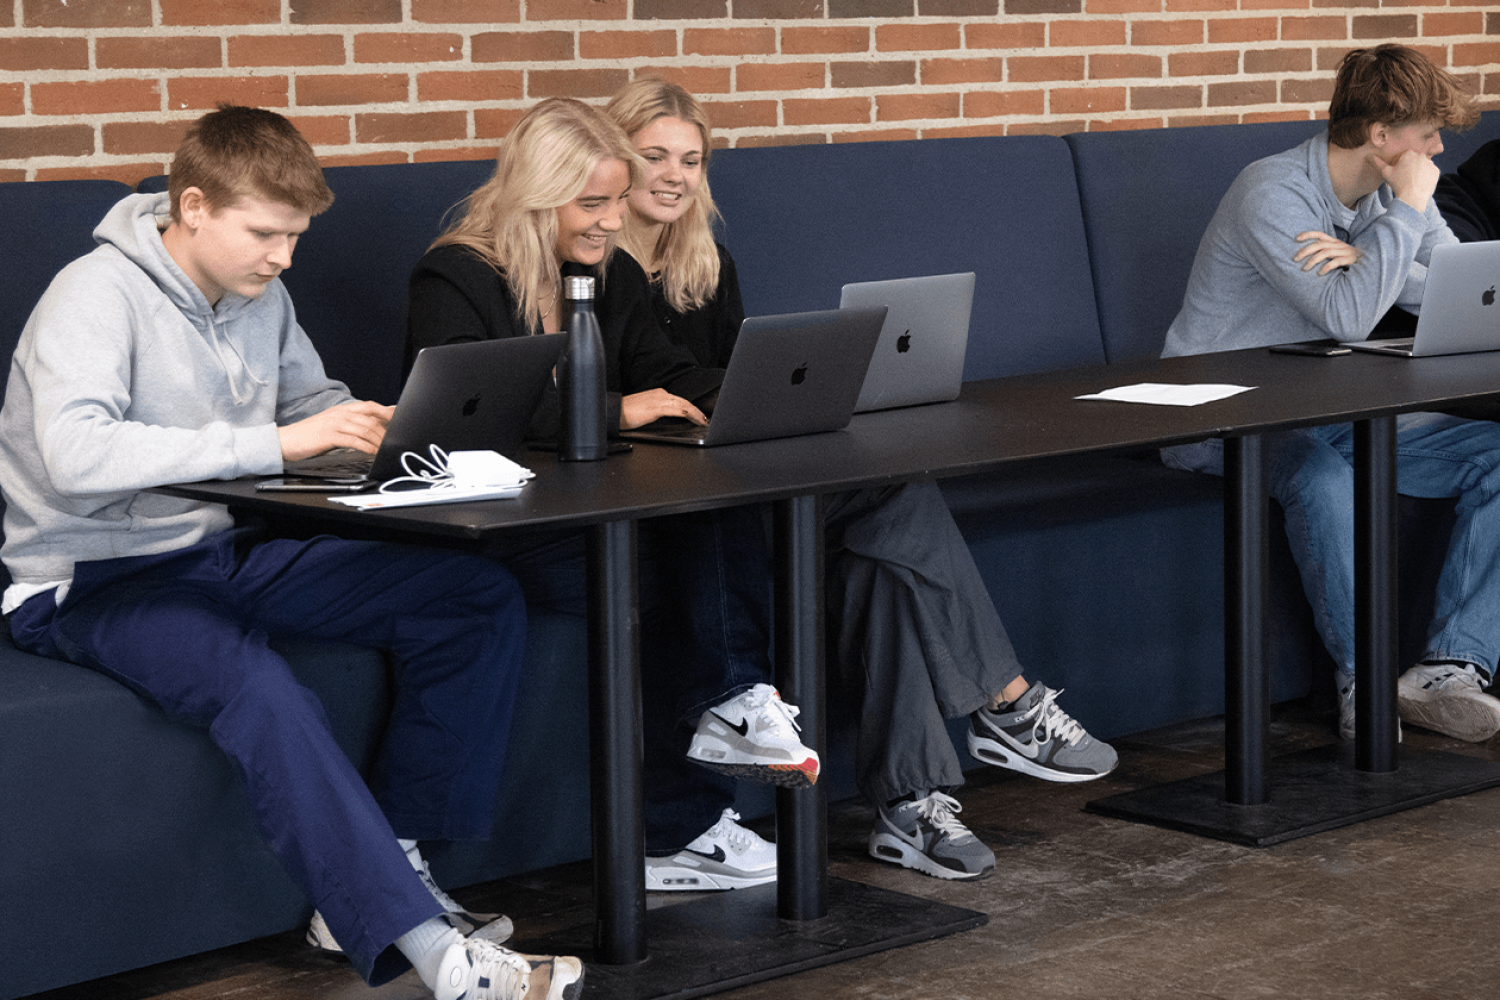 A group of people sitting at desk workstations using laptops.